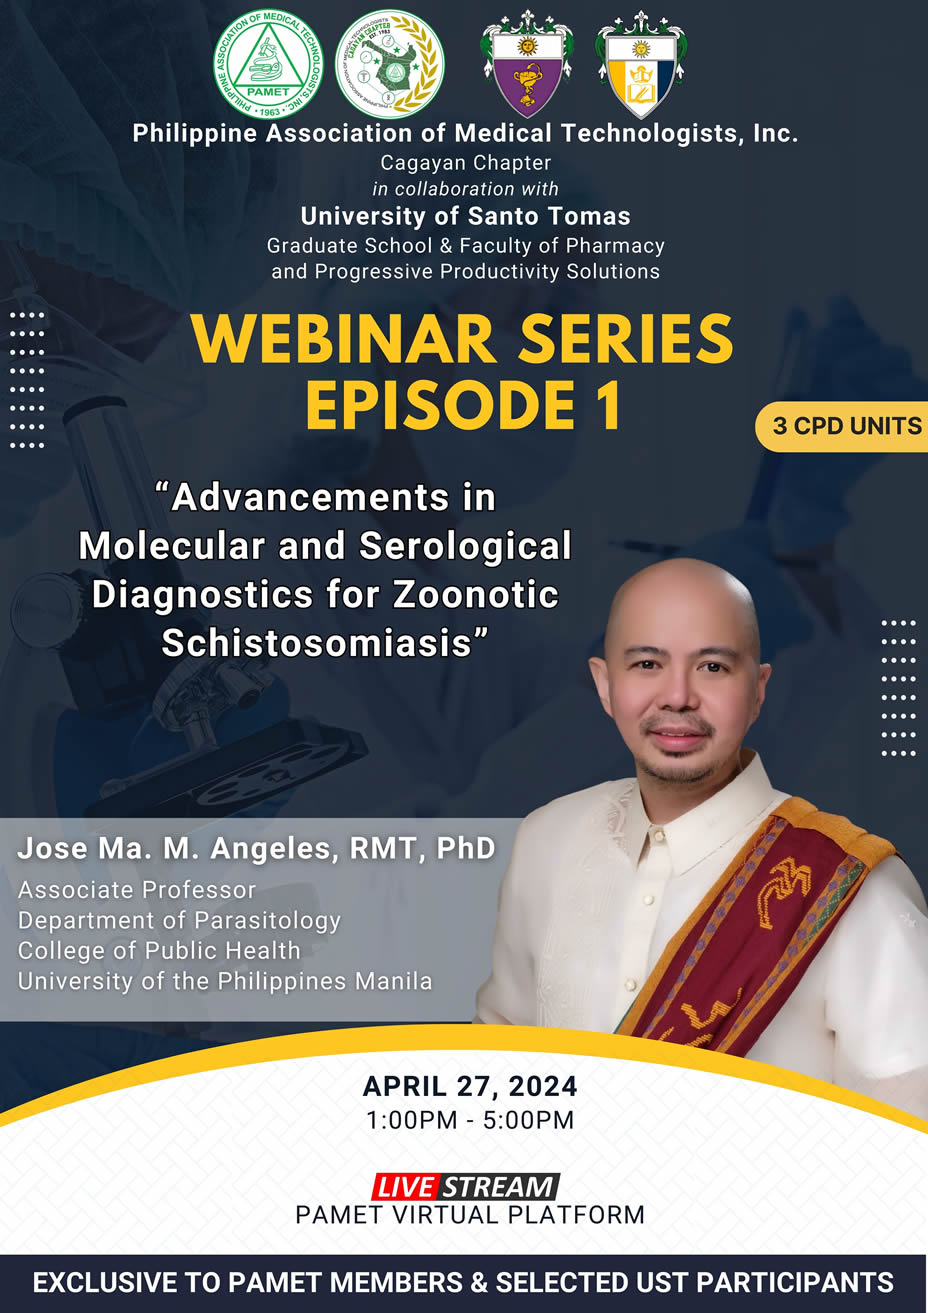 Advancements in Molecular and Serological Diagnostics for Zoonotic Schistosomiasis: Insights from Dr. Jose Ma. M. Angeles